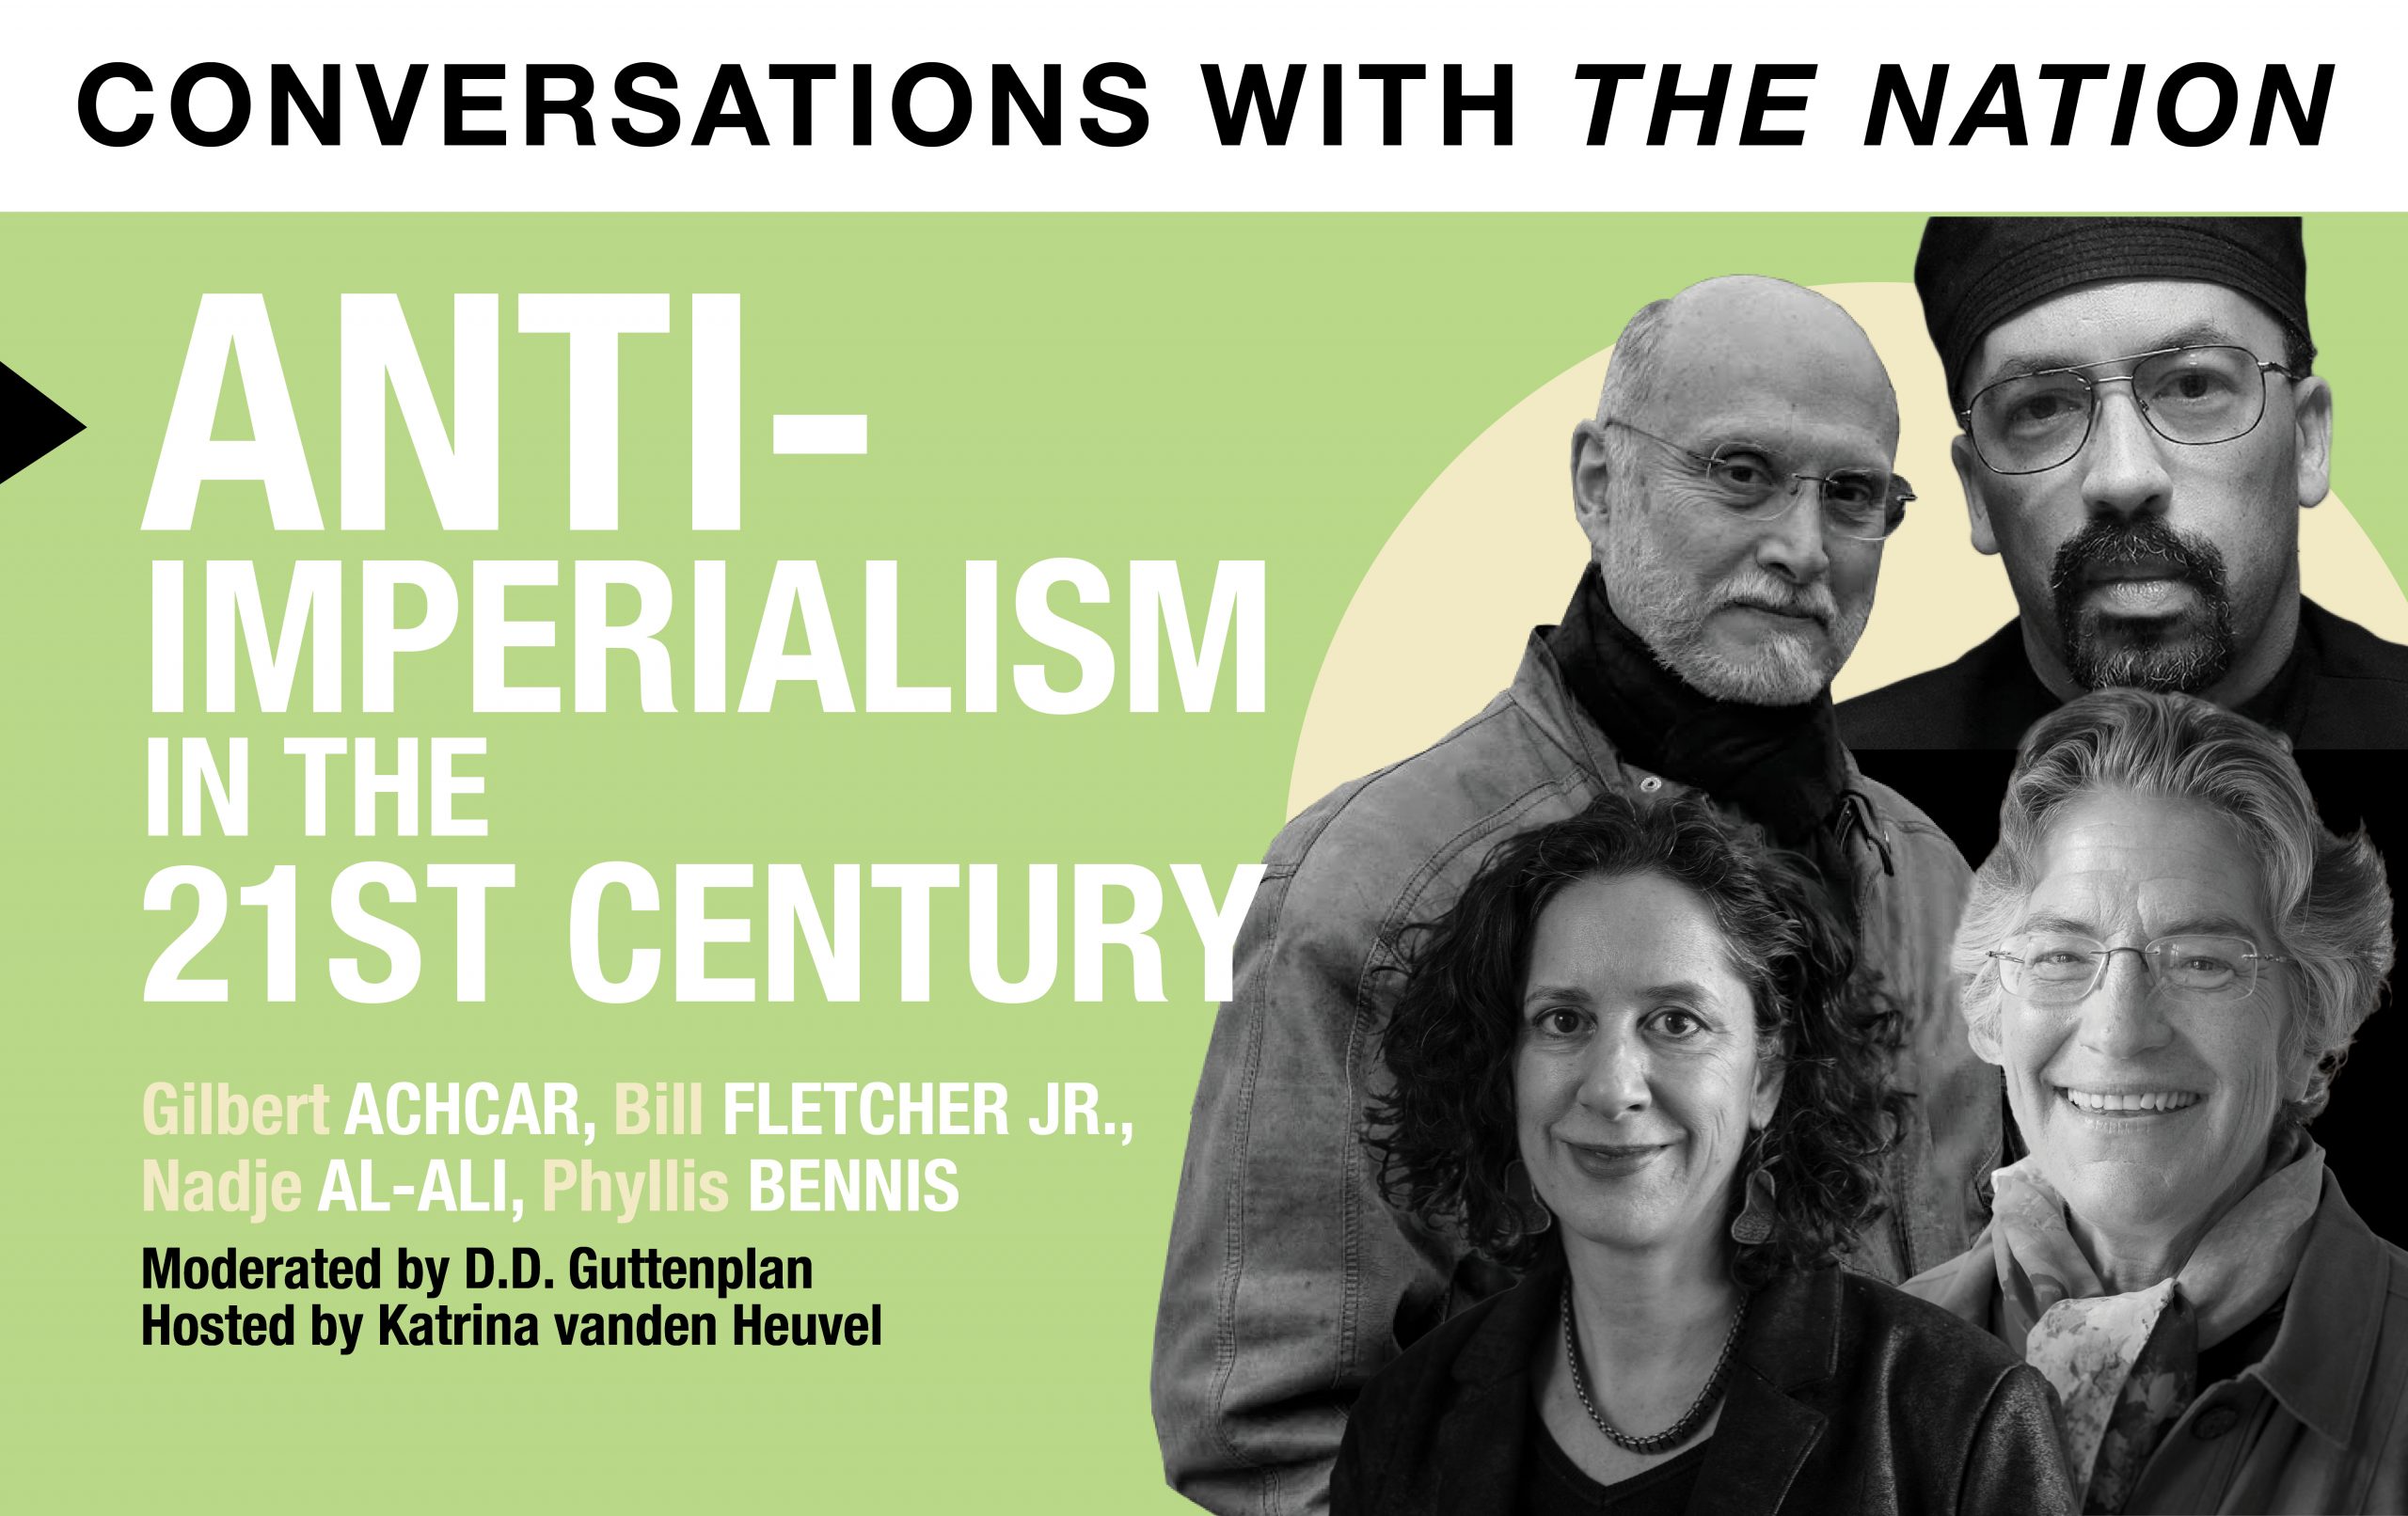 Conversations with The Nation | Anti-Imperialism in the 21st Century